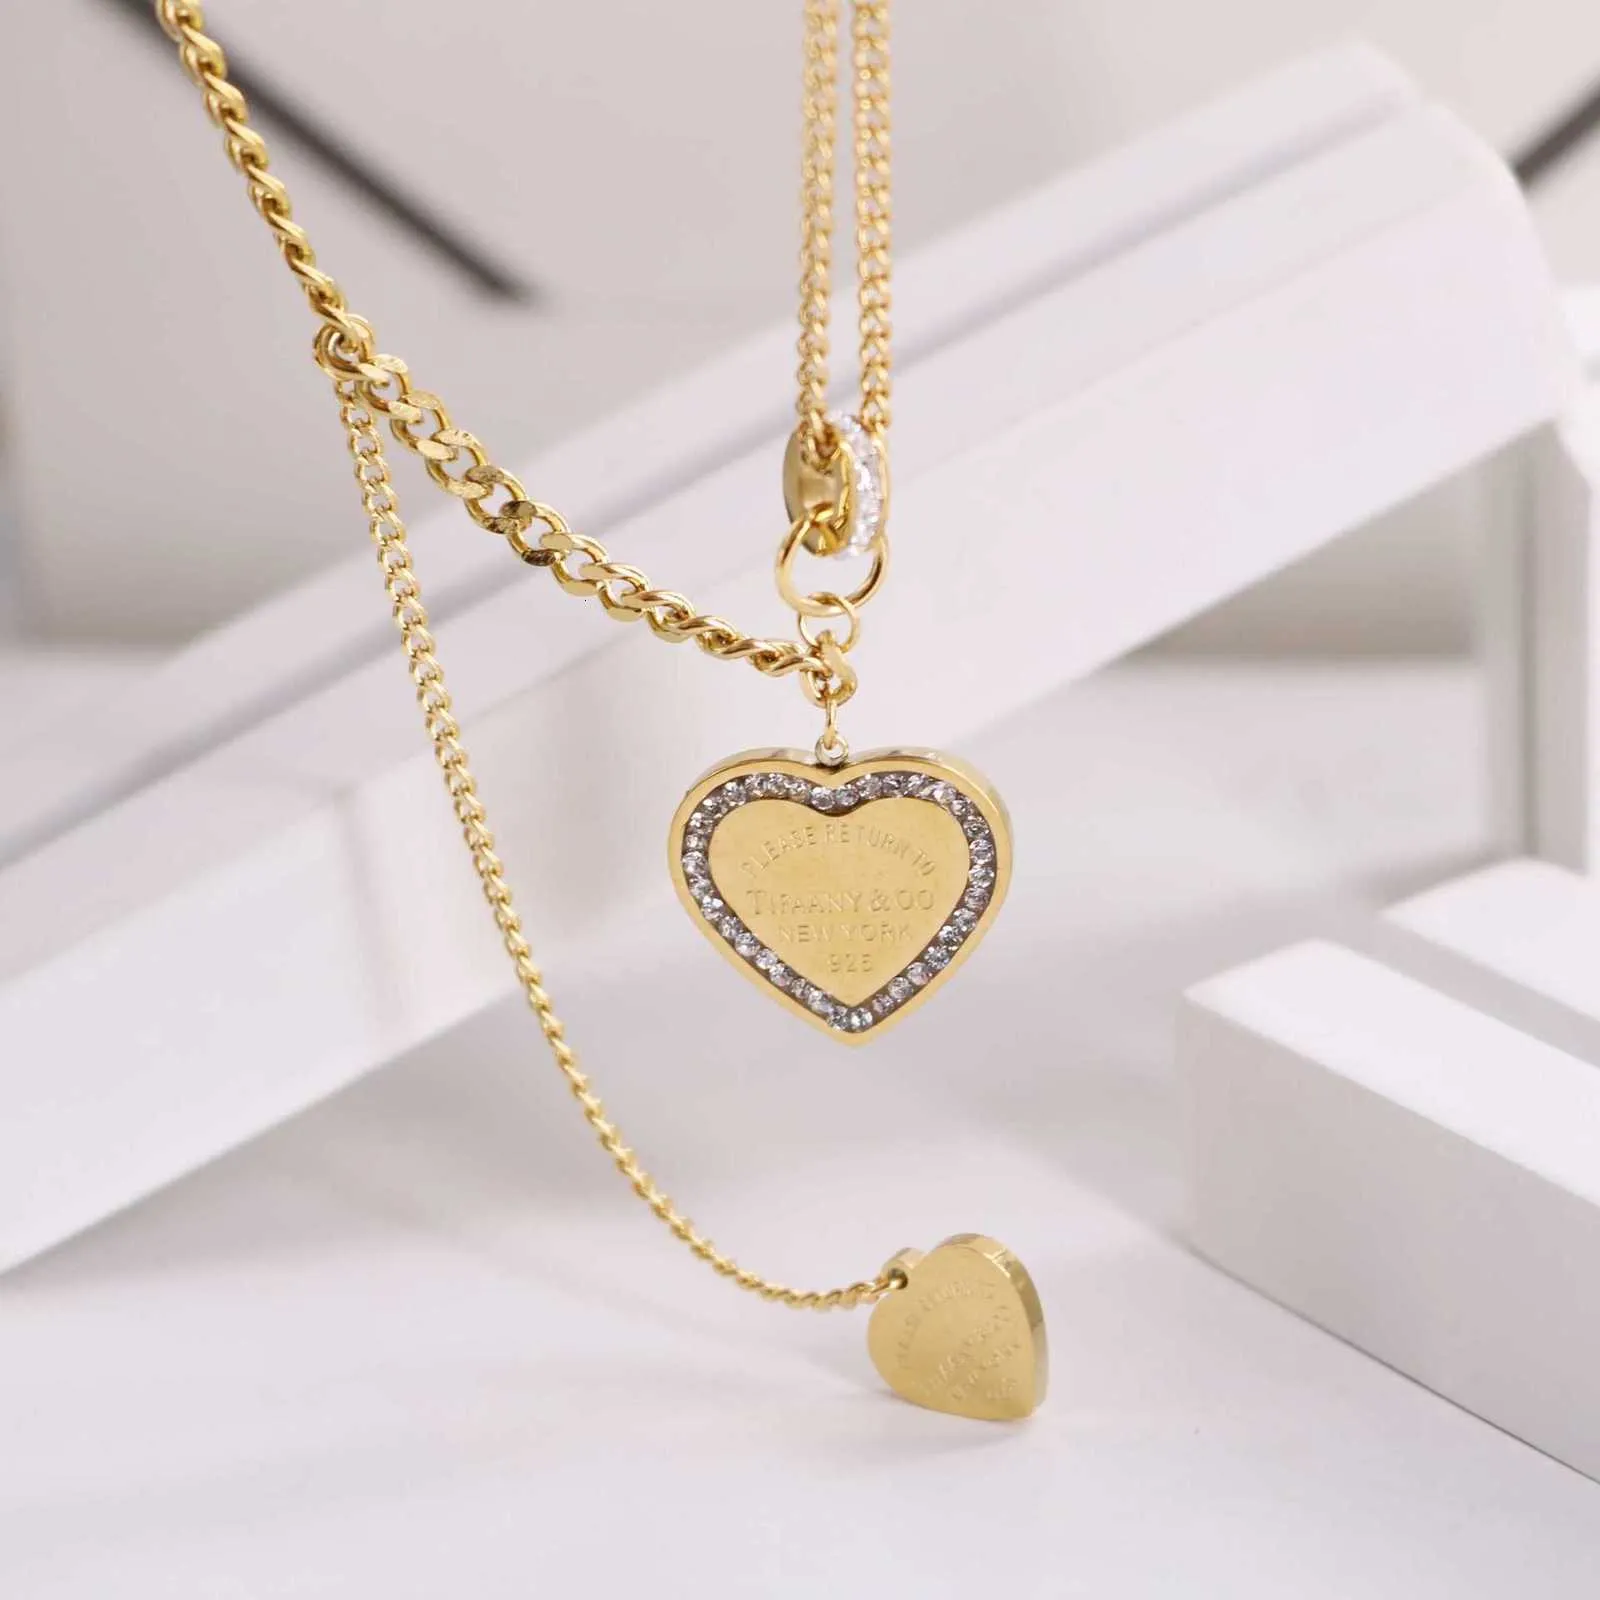 Dropship Three Layer Tassel Jewelry Set With Heart Shaped Pendant Charm  Necklace & Drop Earrings Shiny Jewelry For Women & Girls Wedding Dress  Accessories to Sell Online at a Lower Price